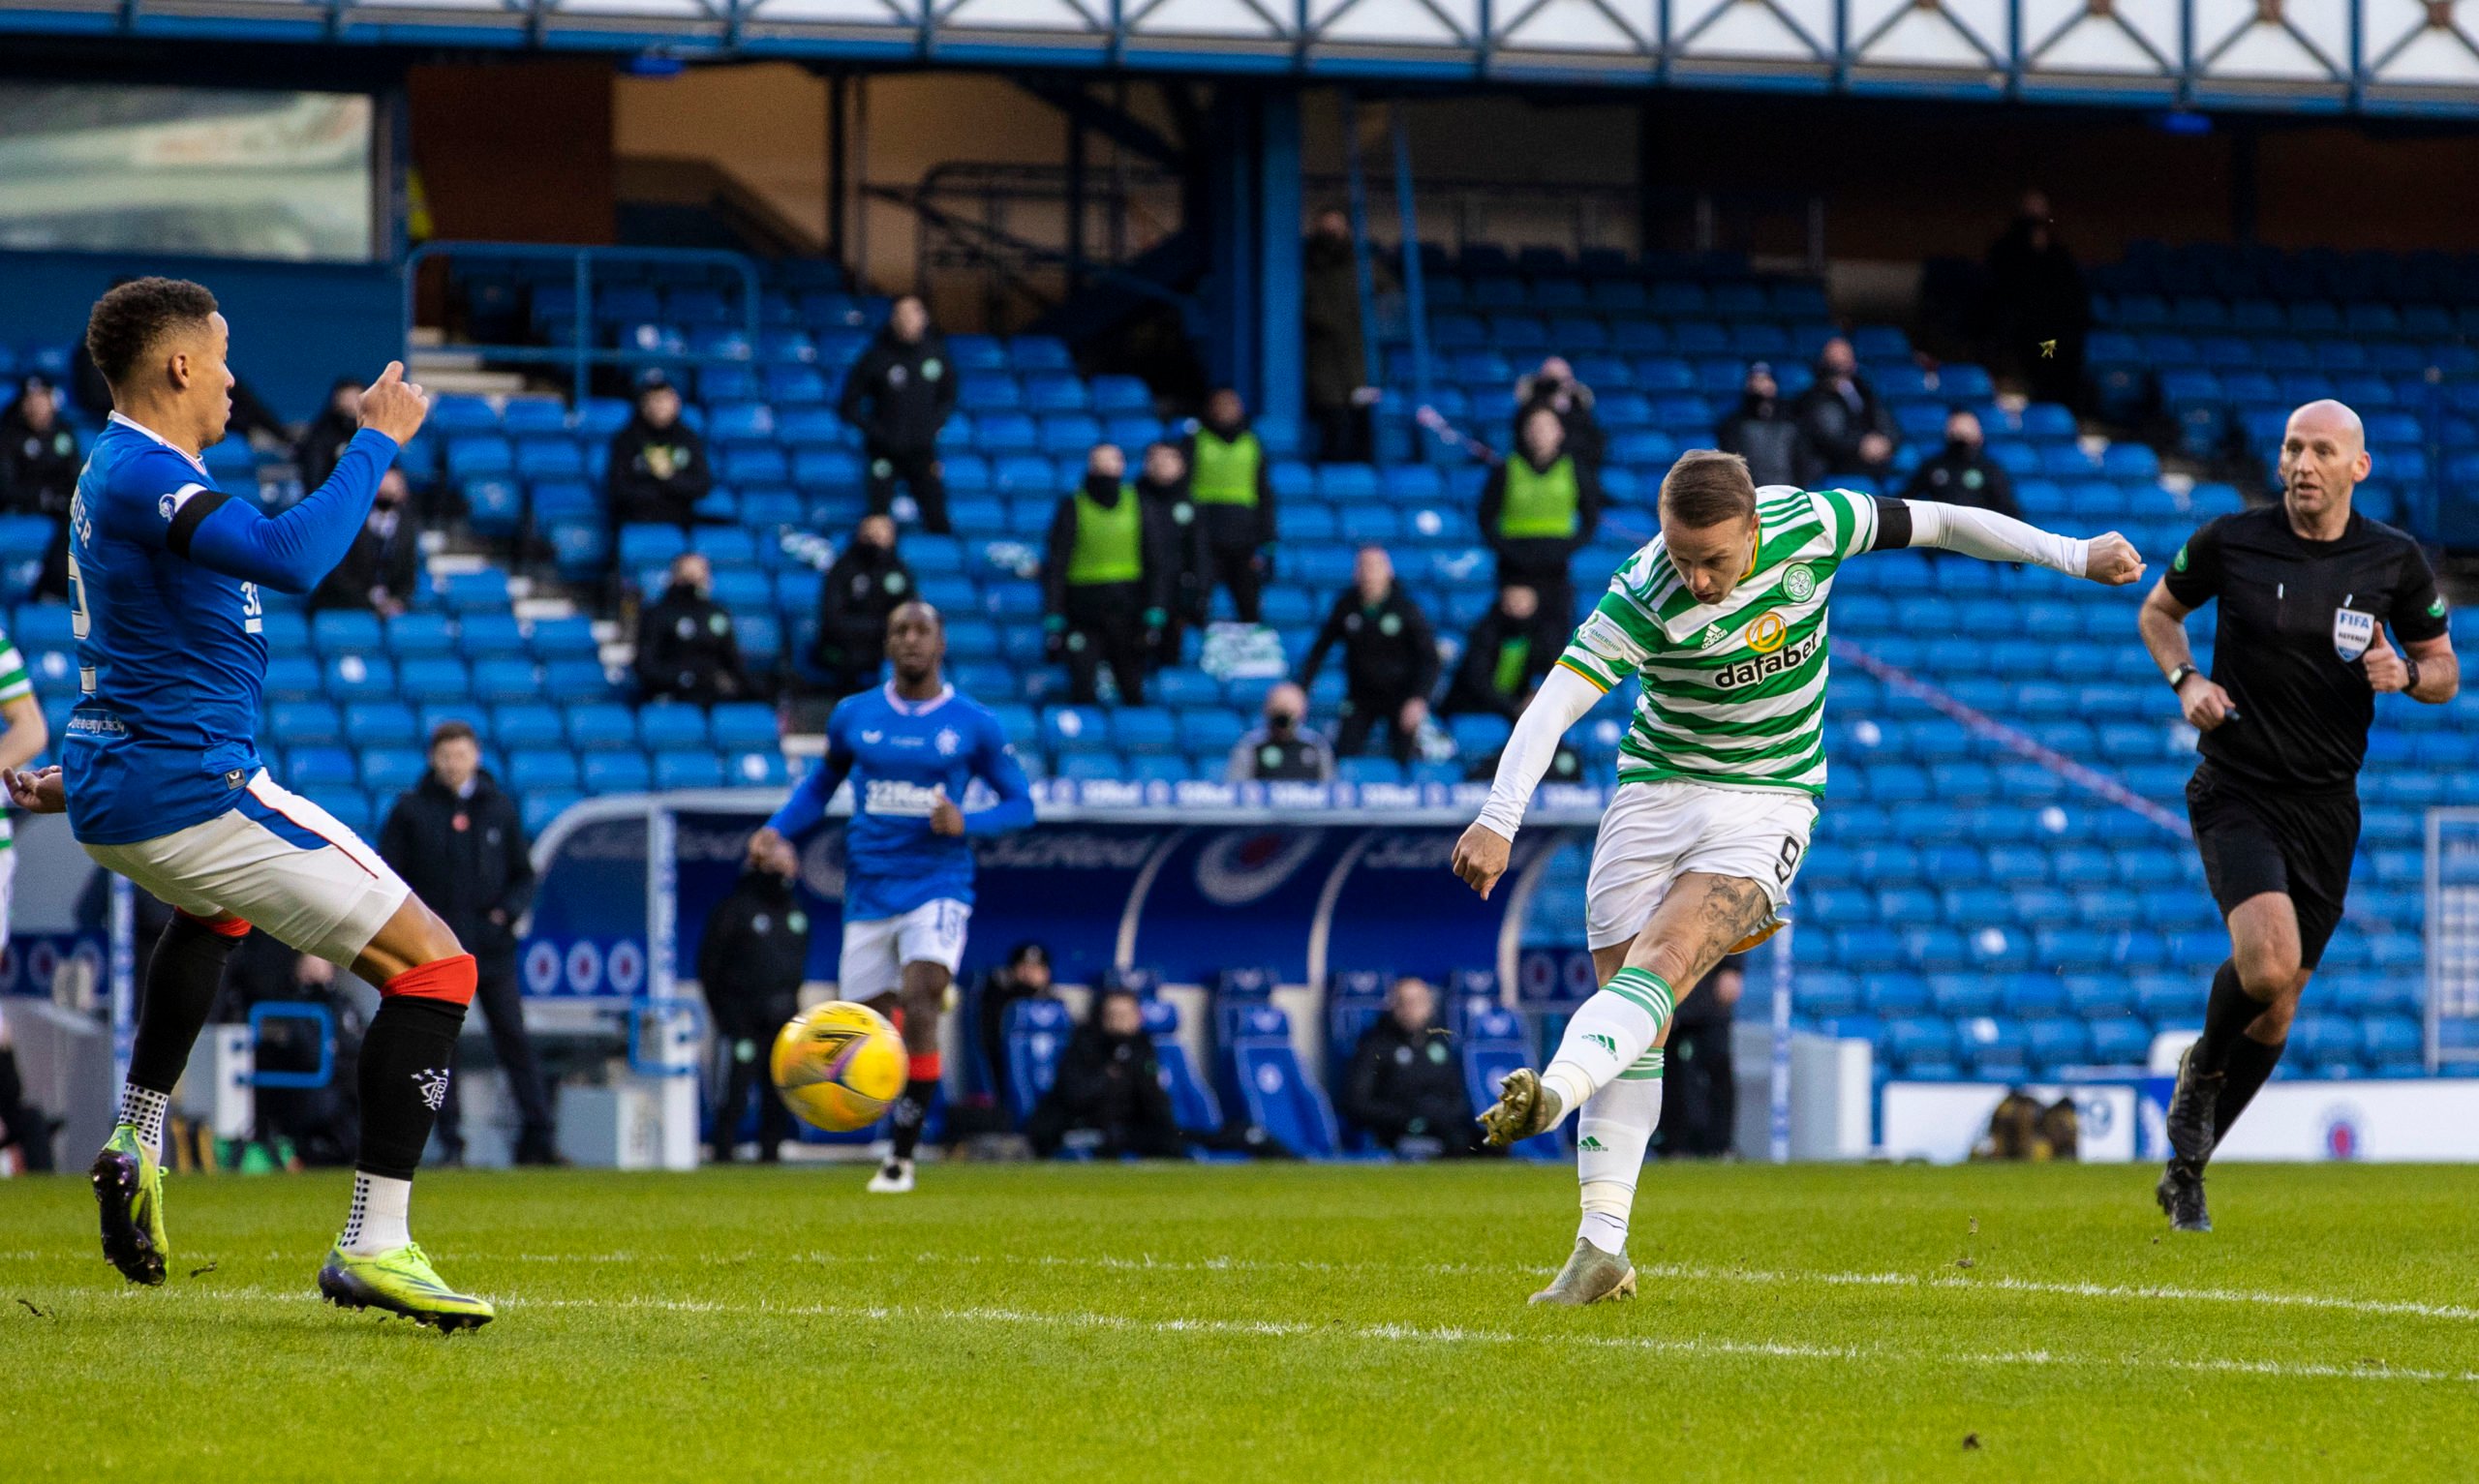 Leigh Griffiths shoots for Celtic at Ibrox